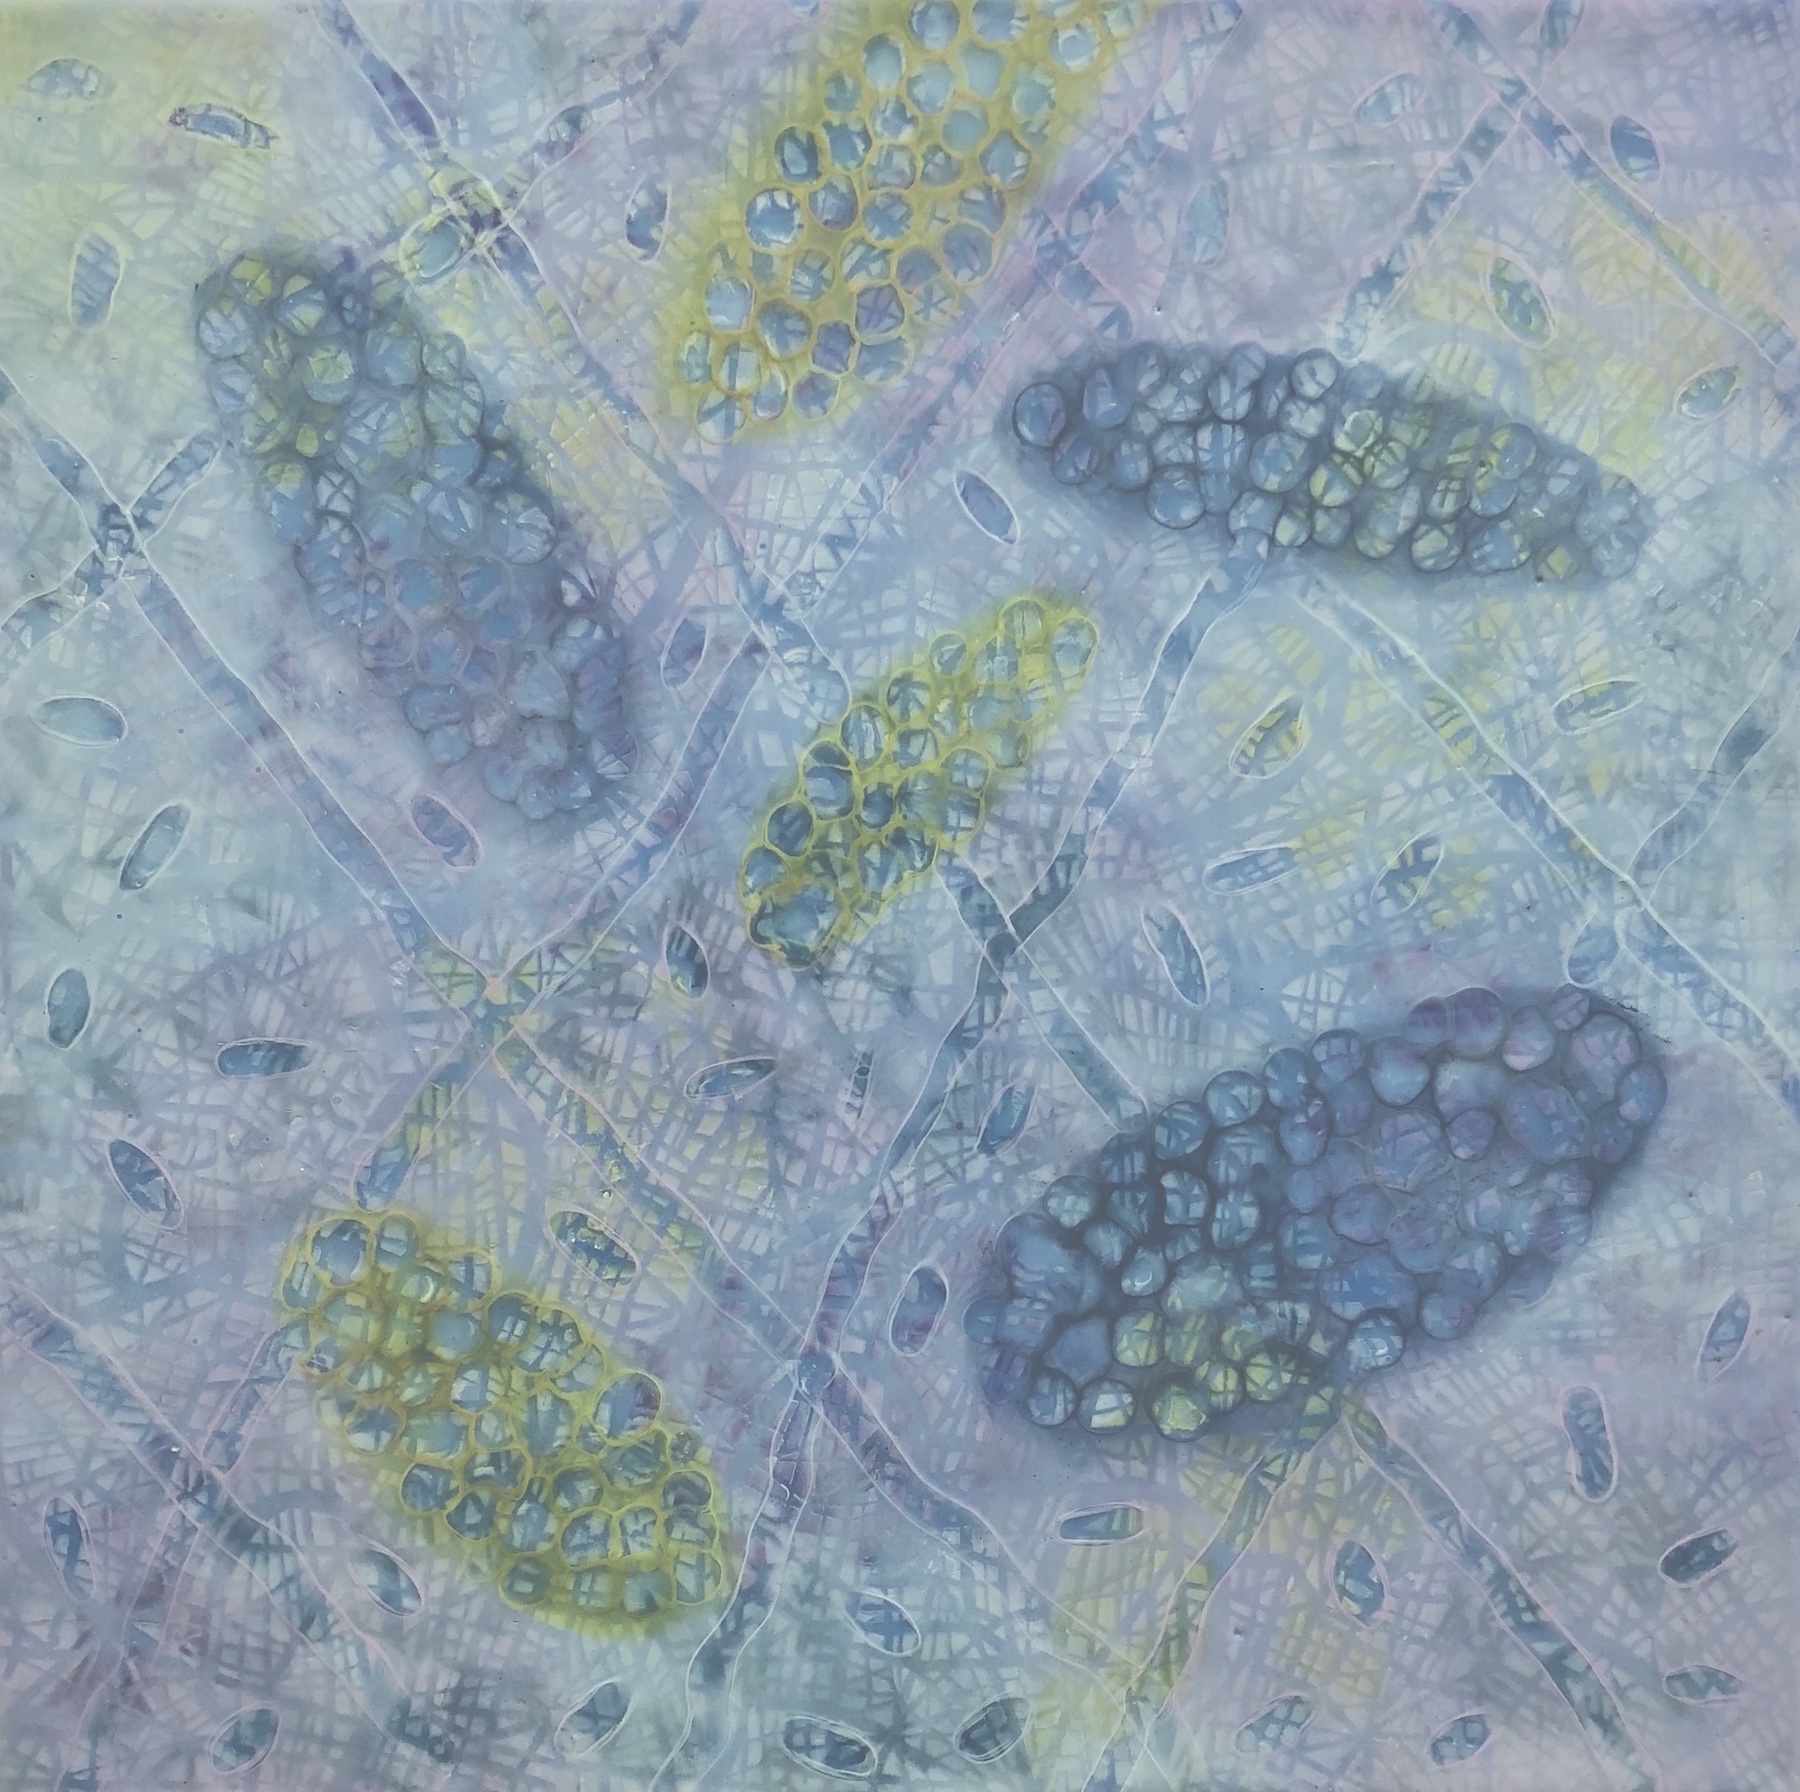    Bio Patterns 8    encaustic and pastel, 20 x 20 inches 